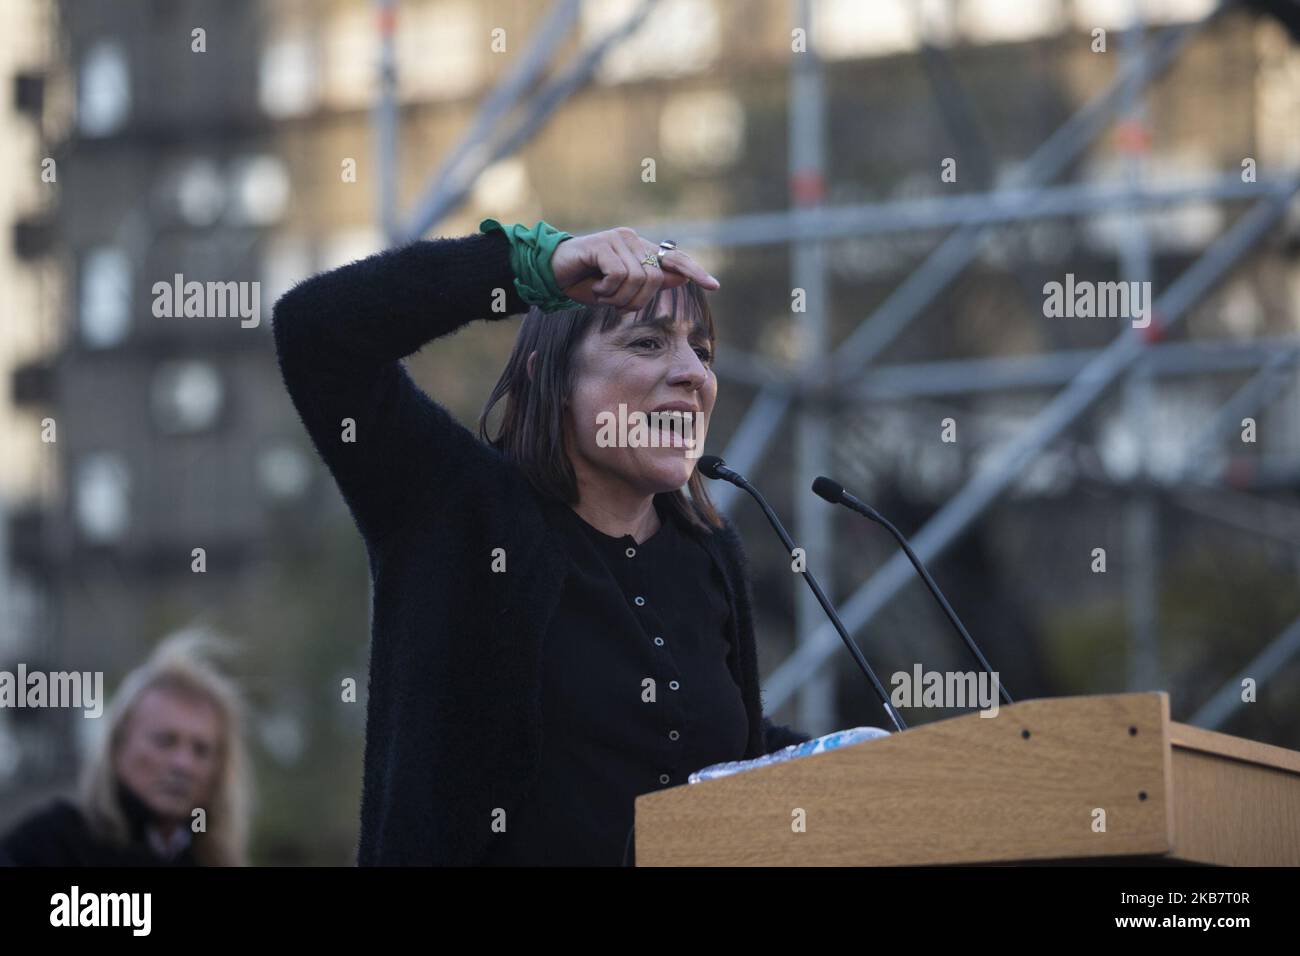 Romina del Pla speaks at a campaign act towards the presidential elections of the Frente de Izquierda Unidad, one of the political forces competing in the 2019 Argentine presidential elections, on October 5, 2019 in Buenos Aires, Argentina. (Photo by Matias Baglietto/NurPhoto) Stock Photo